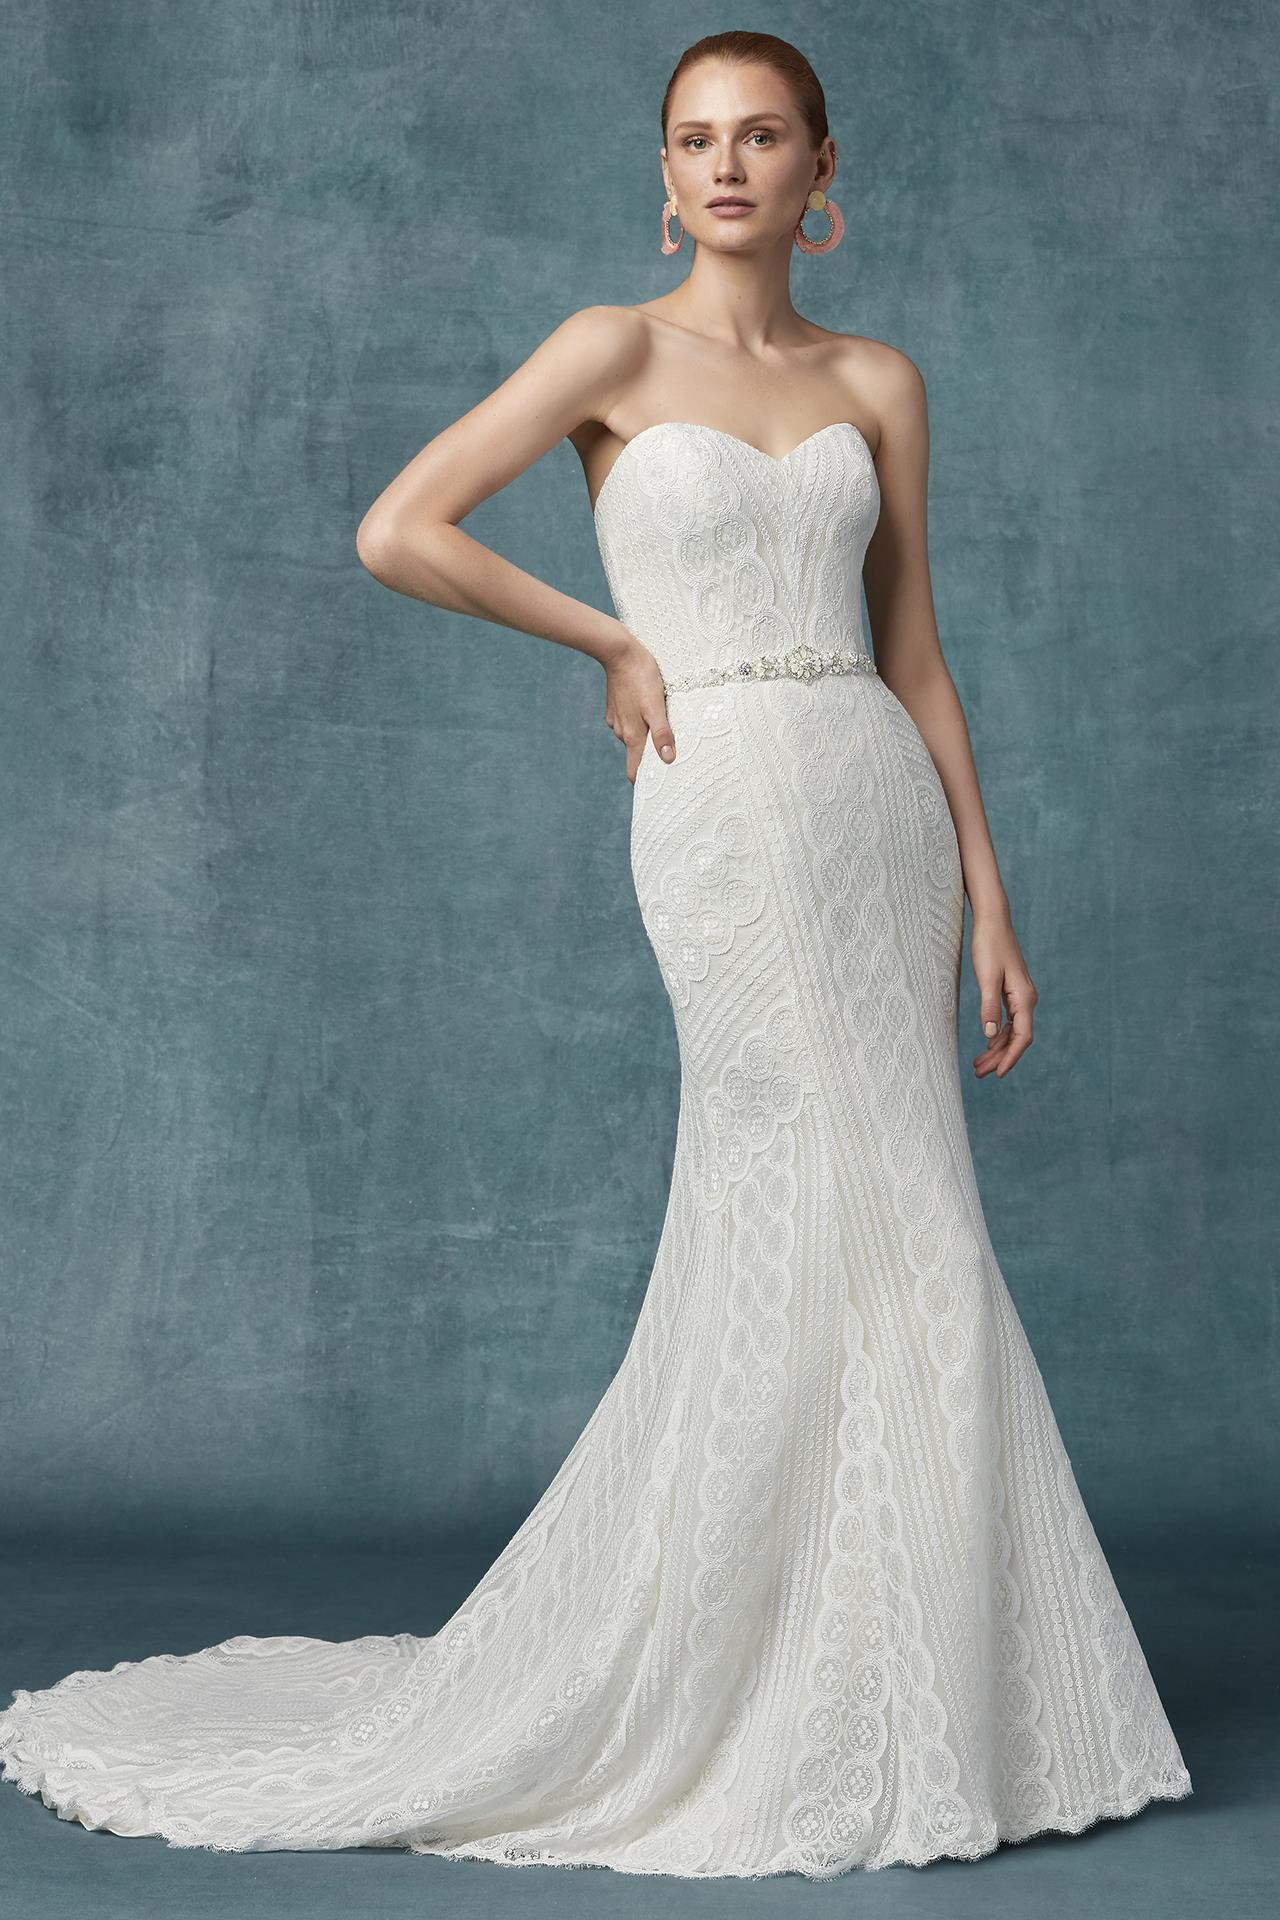 Geraldine Wedding Dress from Maggie Sottero hitched.co.uk